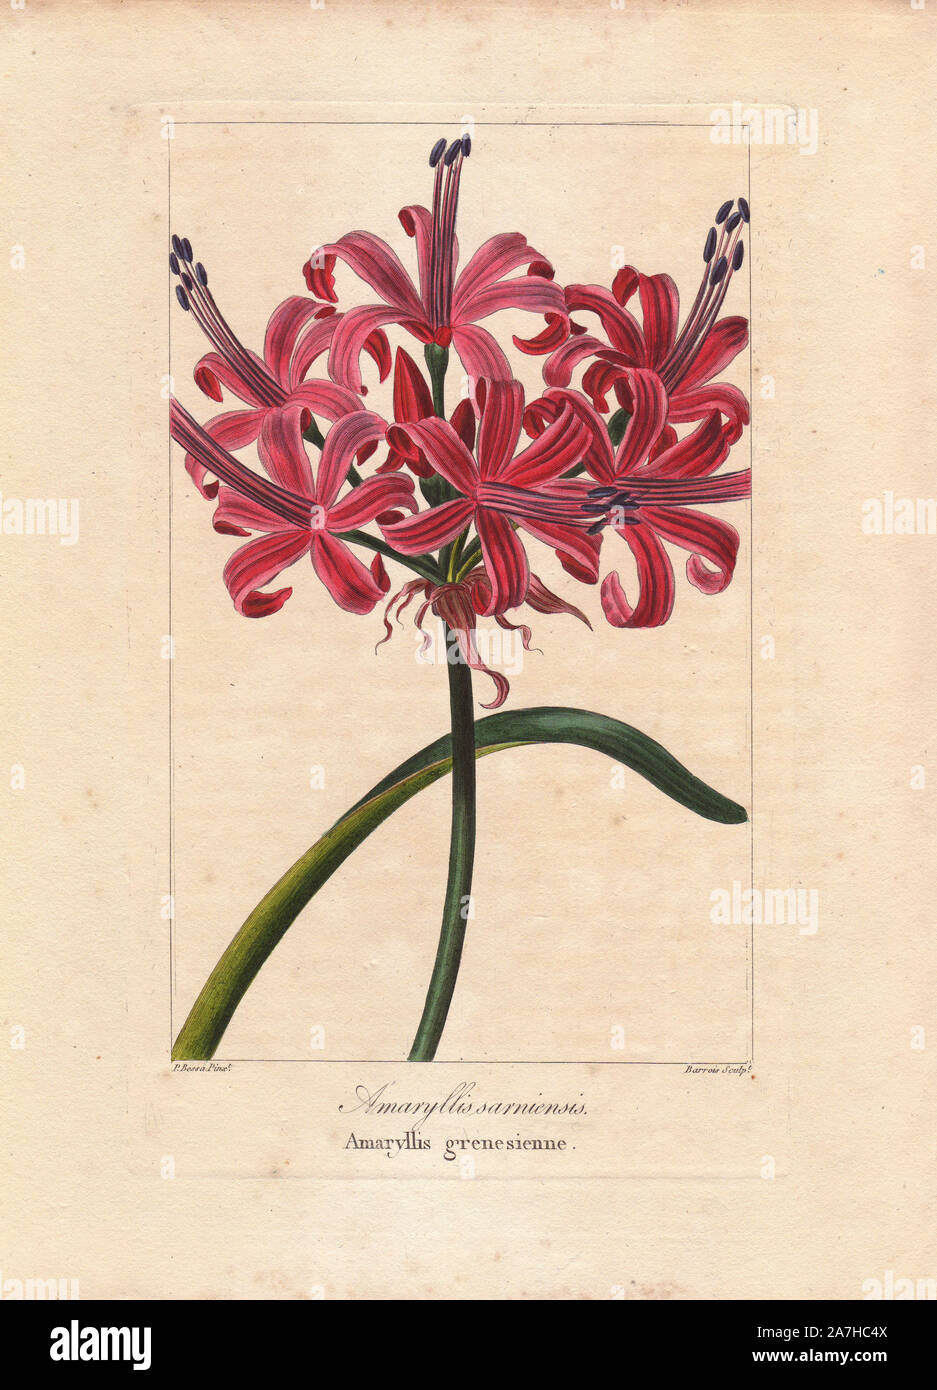 Guernsey lily, Nerine sarniensis, native to South Africa. Handcoloured stipple engraving on copper by Barrois from a botanical illustration by Pancrace Bessa from Mordant de Launay's 'Herbier General de l'Amateur,' Audot, Paris, 1820. The Herbier was published from 1810 to 1827 and edited by Mordant de Launay and Loiseleur-Deslongchamps. Bessa (1772-1830s), along with Redoute and Turpin, is considered one of the greatest French botanical artists of the 19th century. Stock Photo